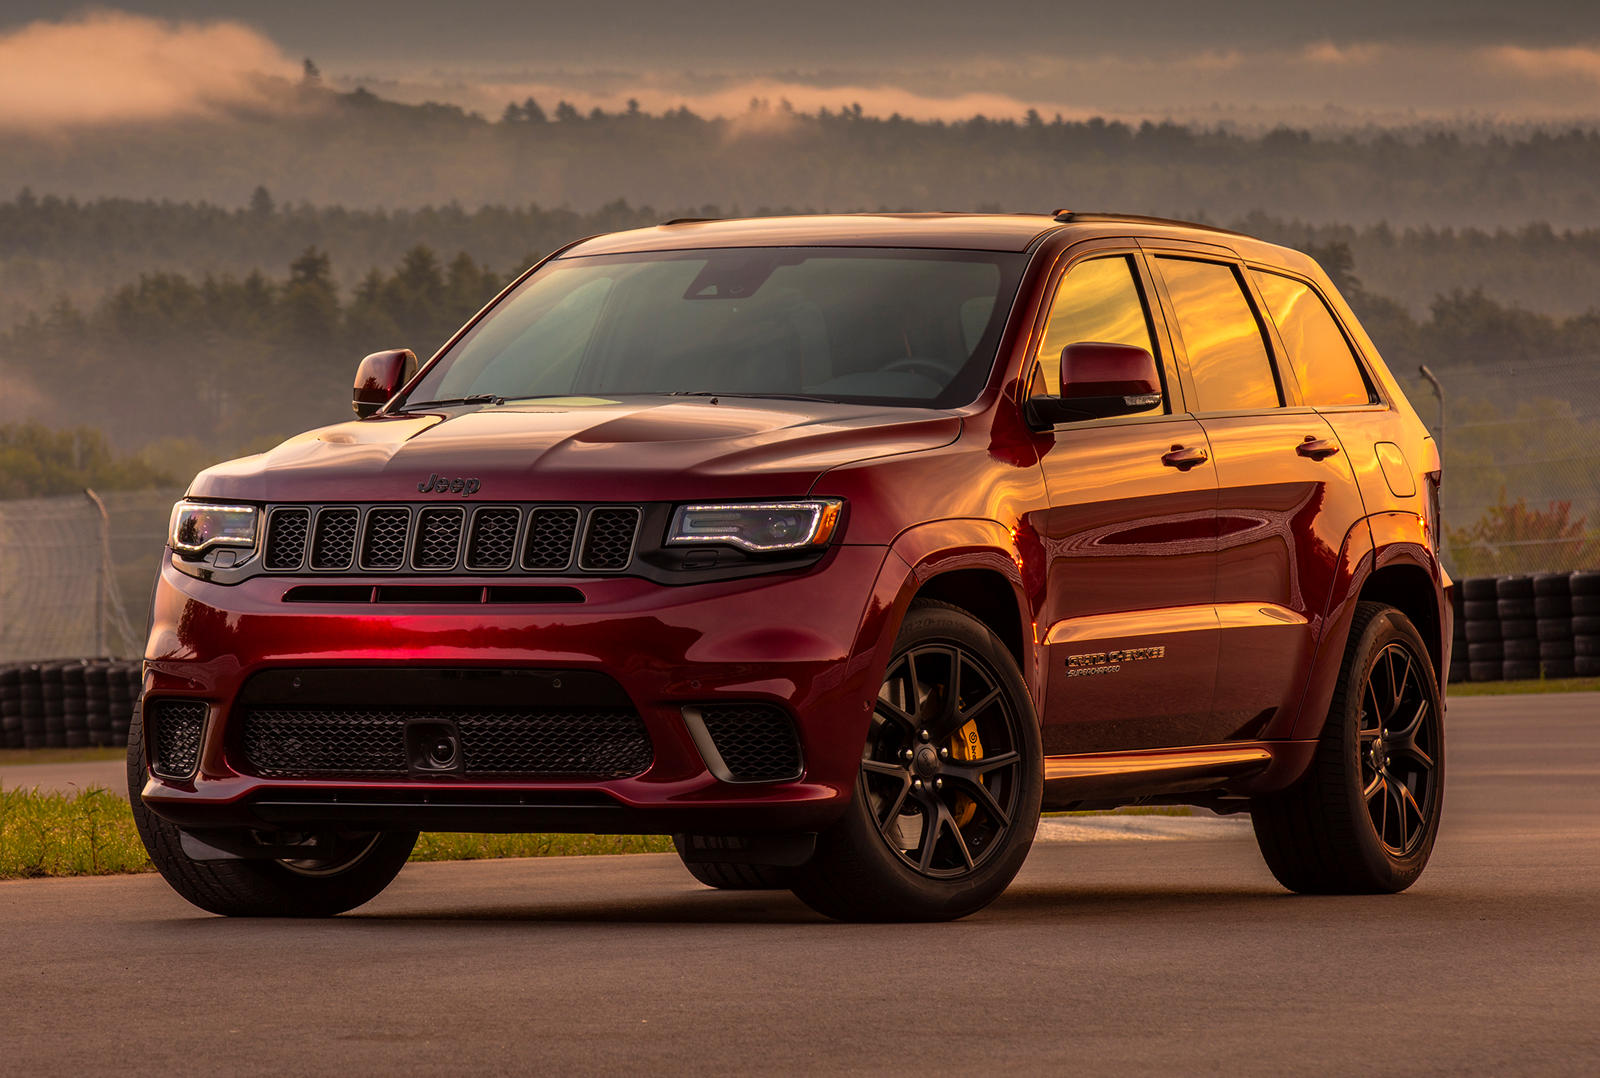 This Is How Much The Jeep Grand Cherokee Trackhawk Costs In The UK